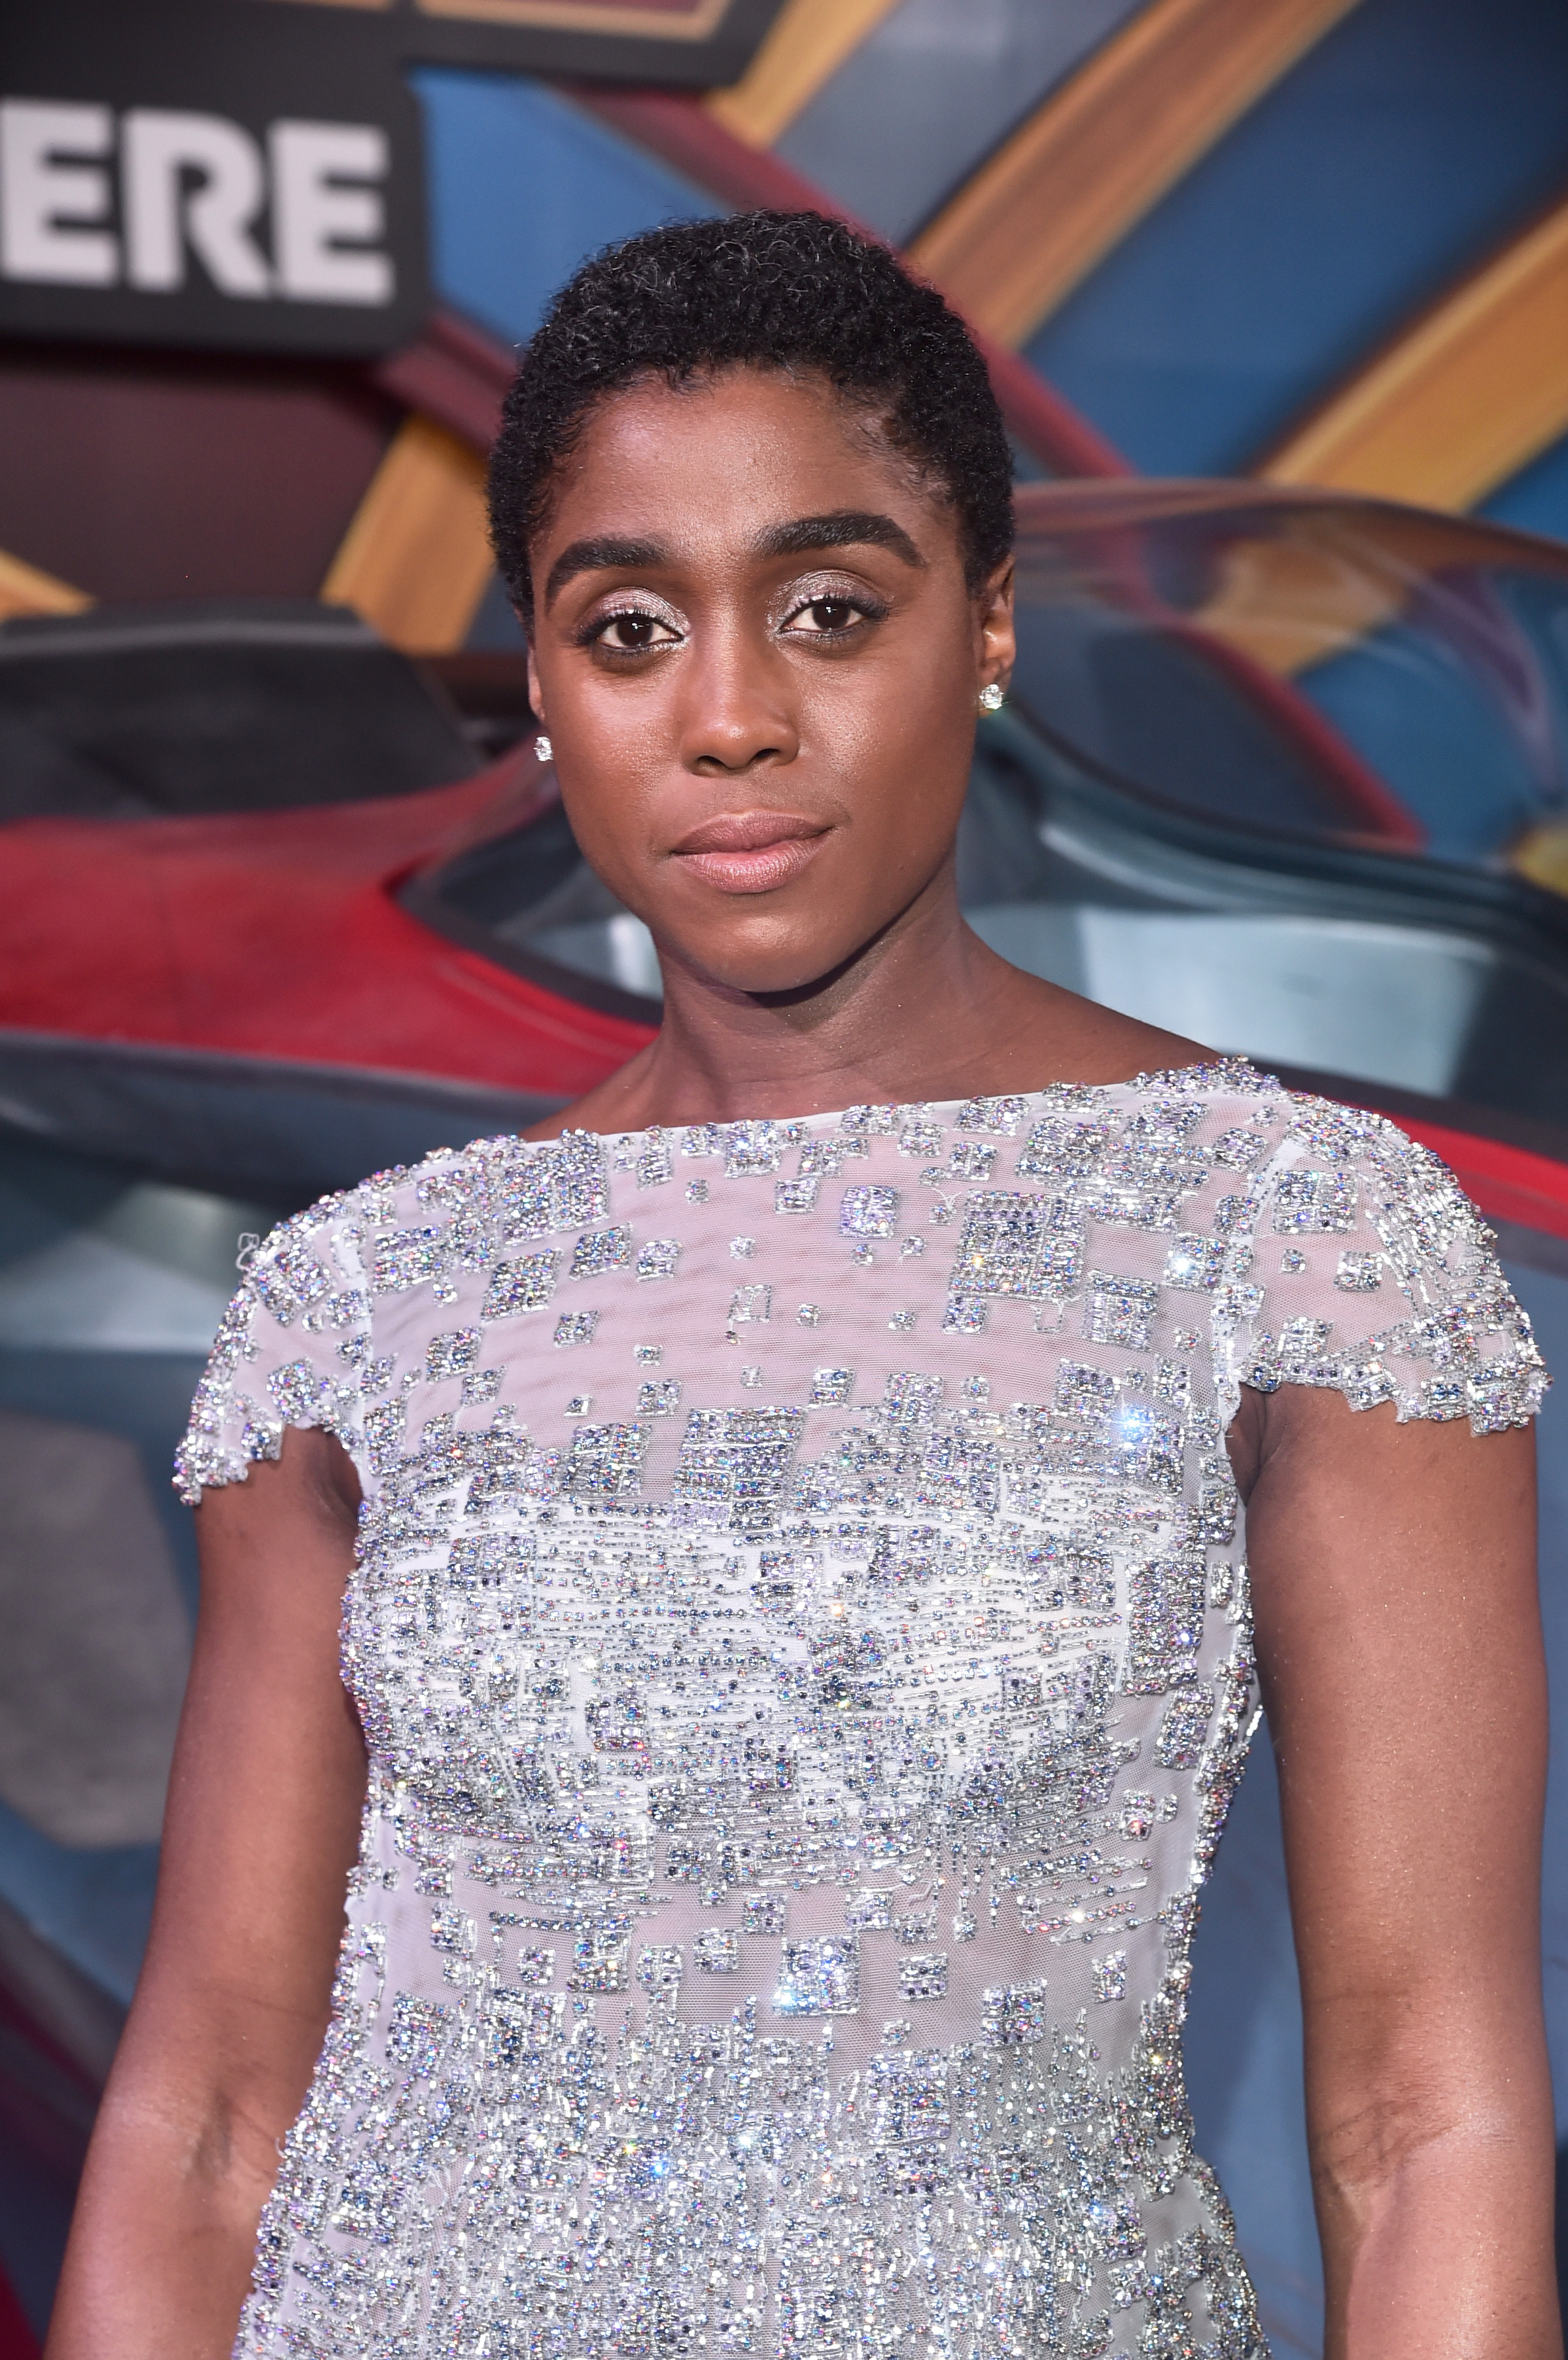 Actor Lashana Lynch attends the Los Angeles World Premiere of Marvel Studios' "Captain Marvel" at Dolby Theatre on March 4, 2019 in Hollywood, California | Source: Getty Images